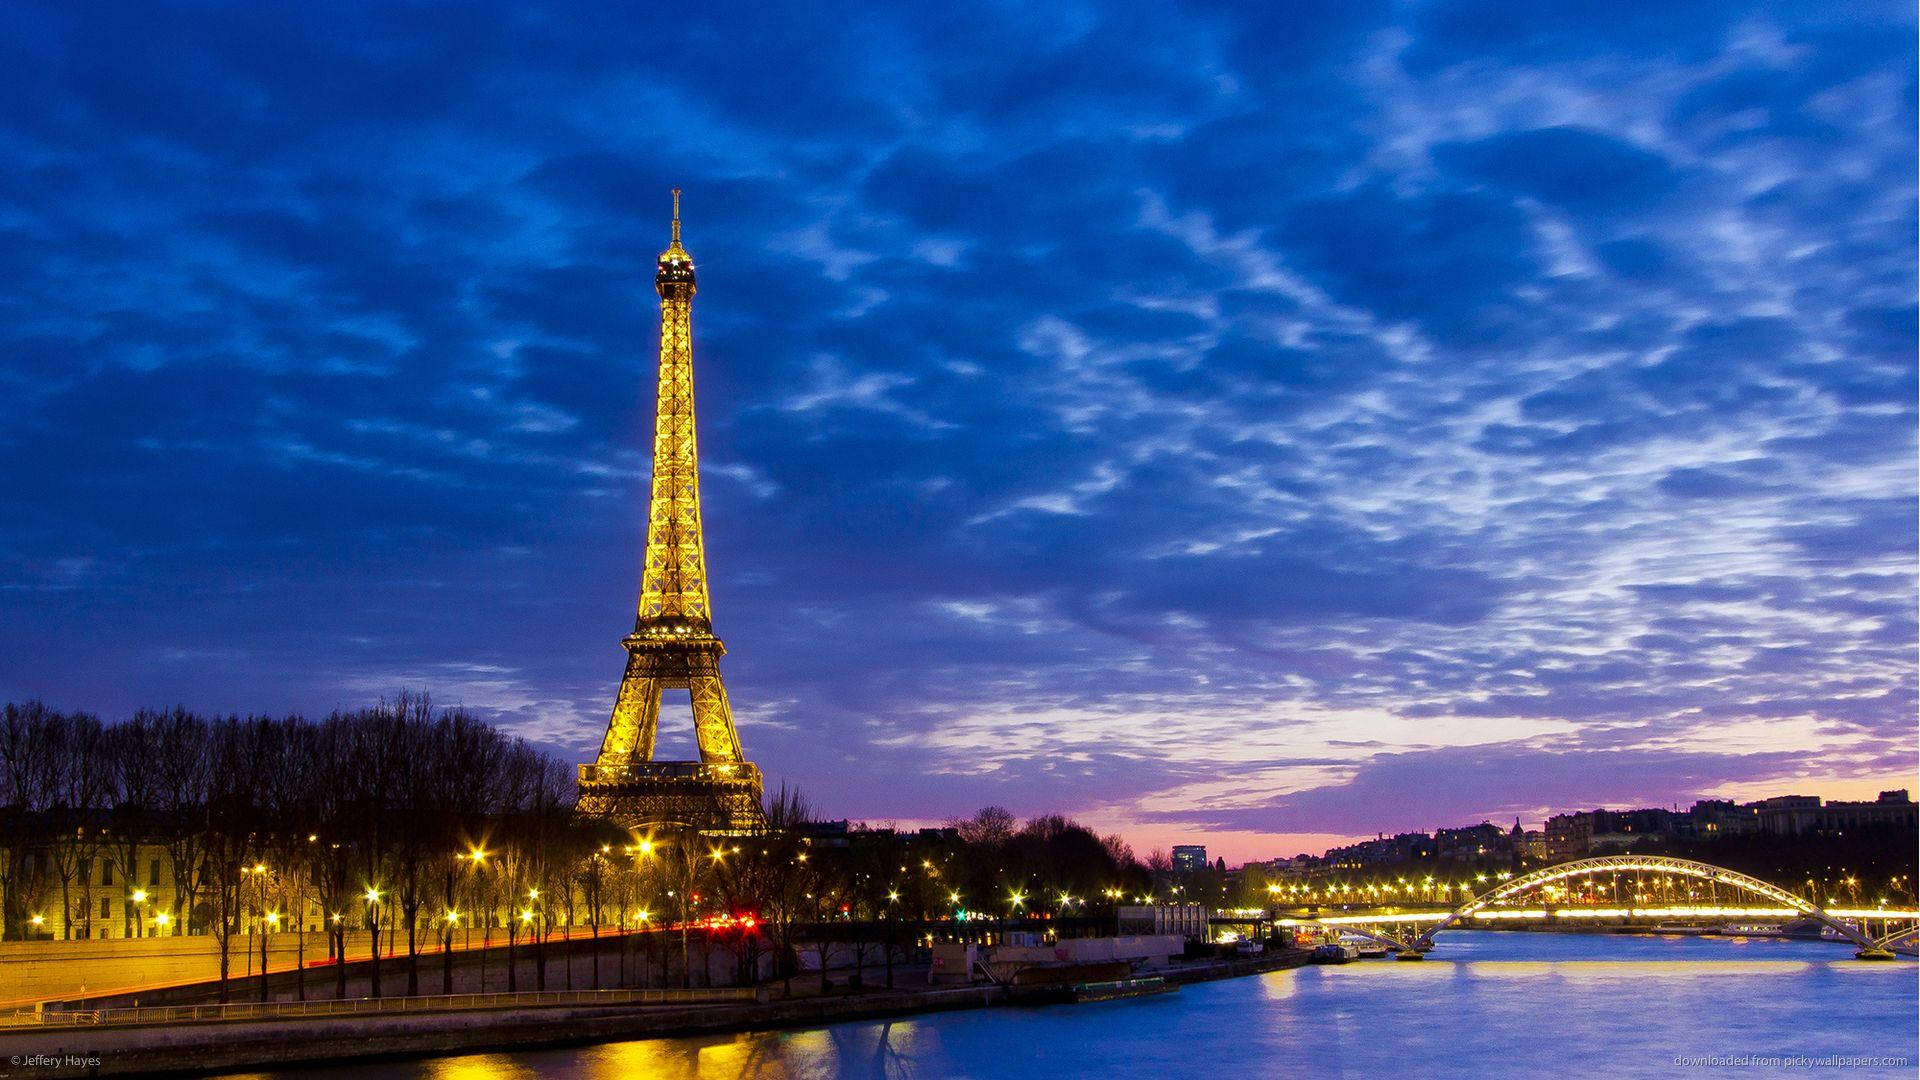 The iconic Paris Eiffel Tower overlooking the Seine River Wallpaper